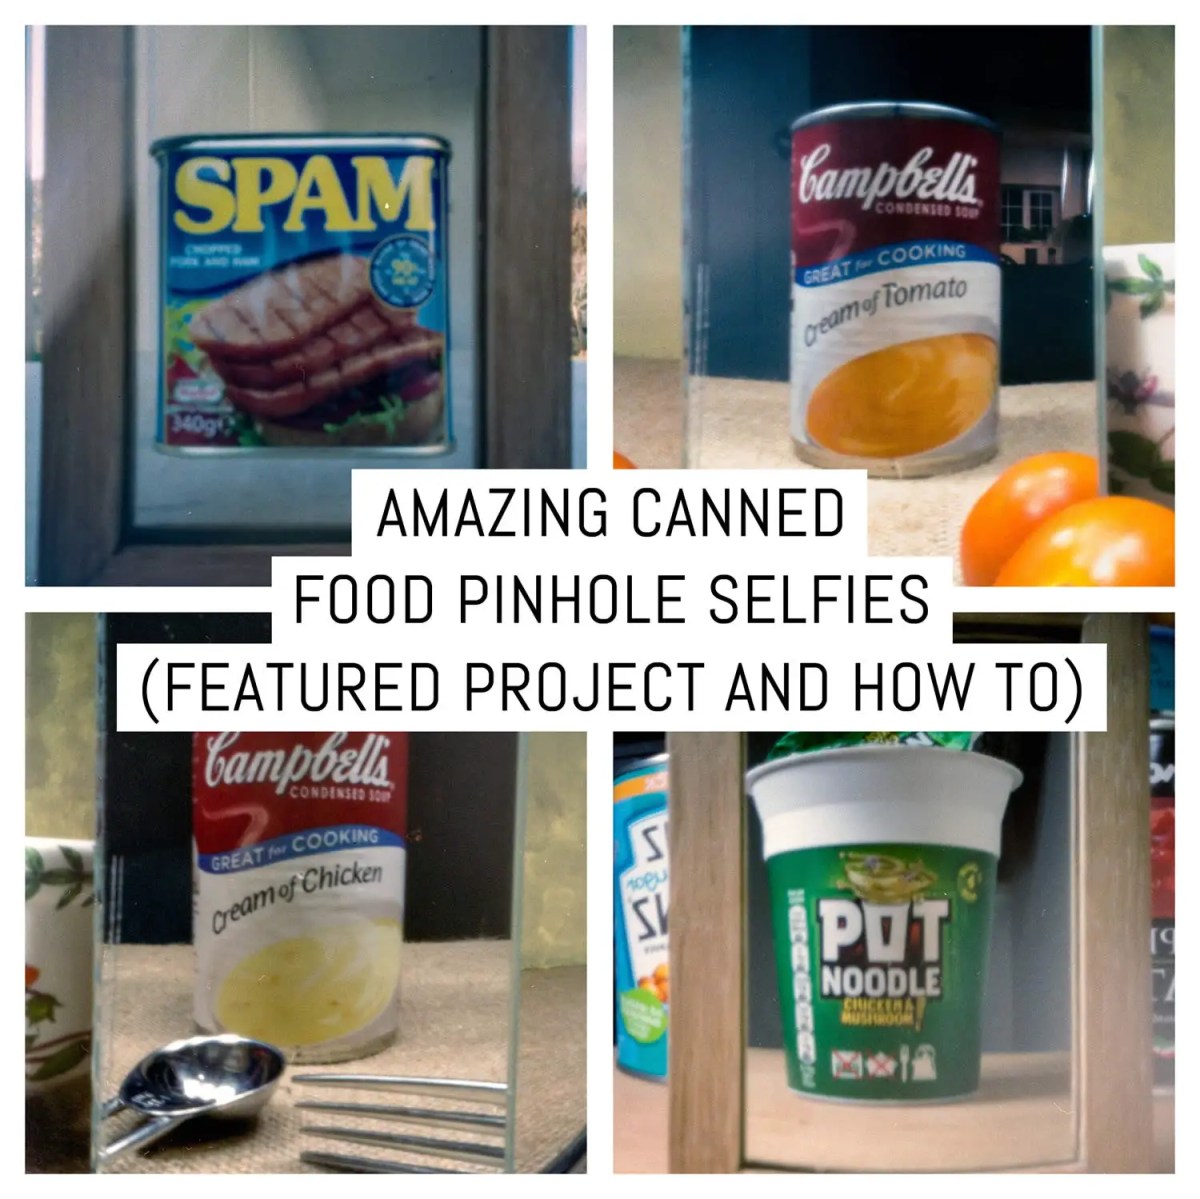 Amazing canned food pinhole selfies (featured project and how to)